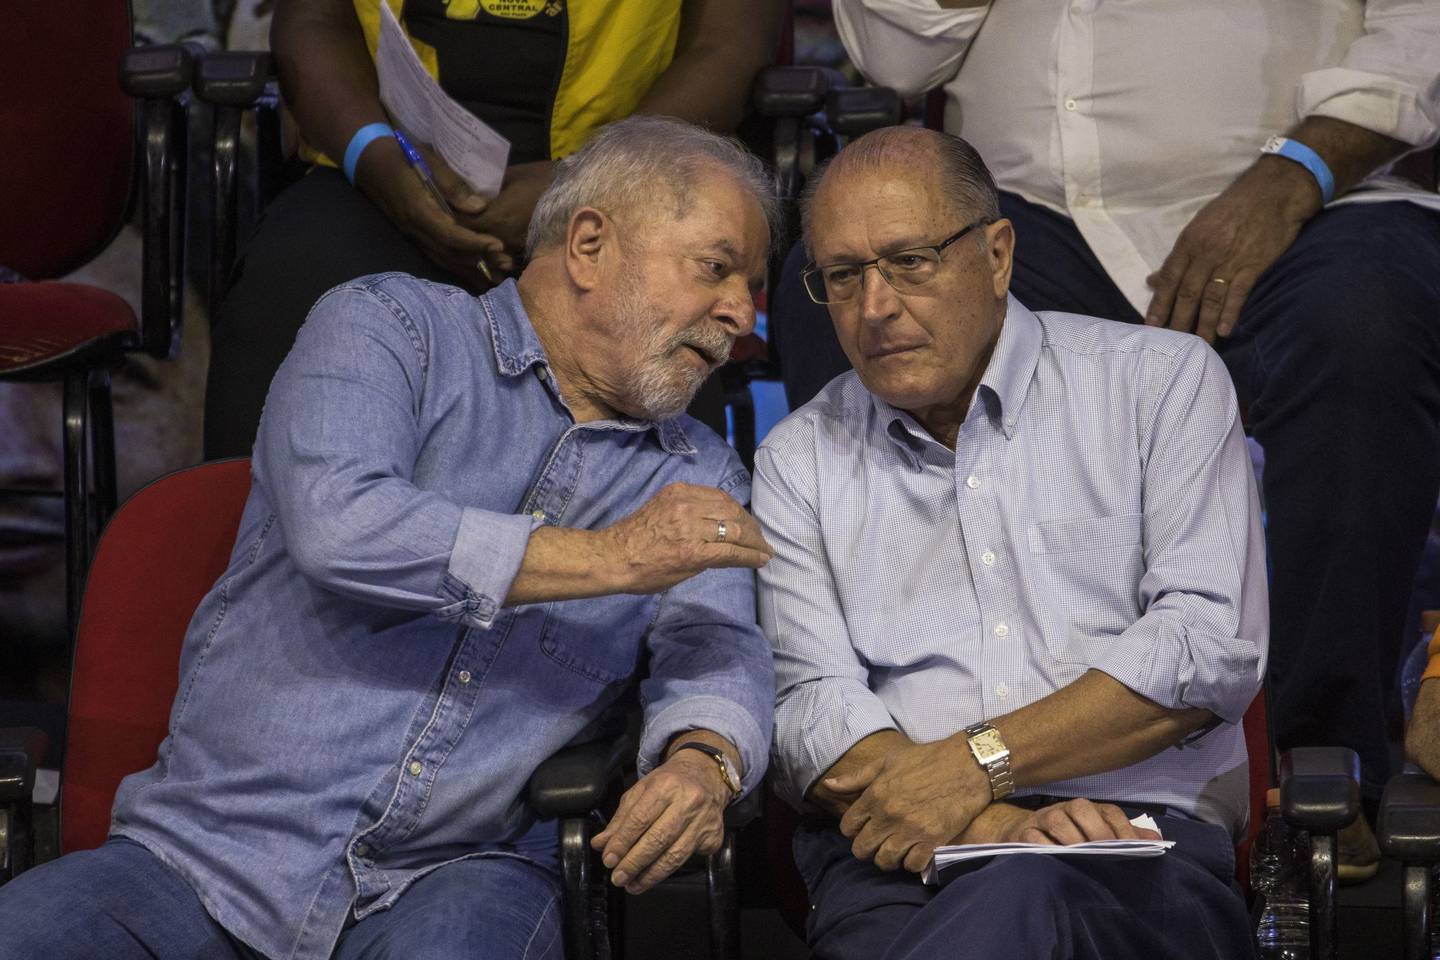 Luiz Inacio Lula da Silva, Brazil's former president, left, speaks with Geraldo Alckmin, presidential candidate for the Brazilian Social Democracy Party (PSDB), during an event with union leaders in Sao Paulo, Brazil, on Thursday, April 14, 2022. Lula, who led the country from 2003-2010, has been the presidential front-runner since Brazil's top court tossed out graft convictions against him last year.